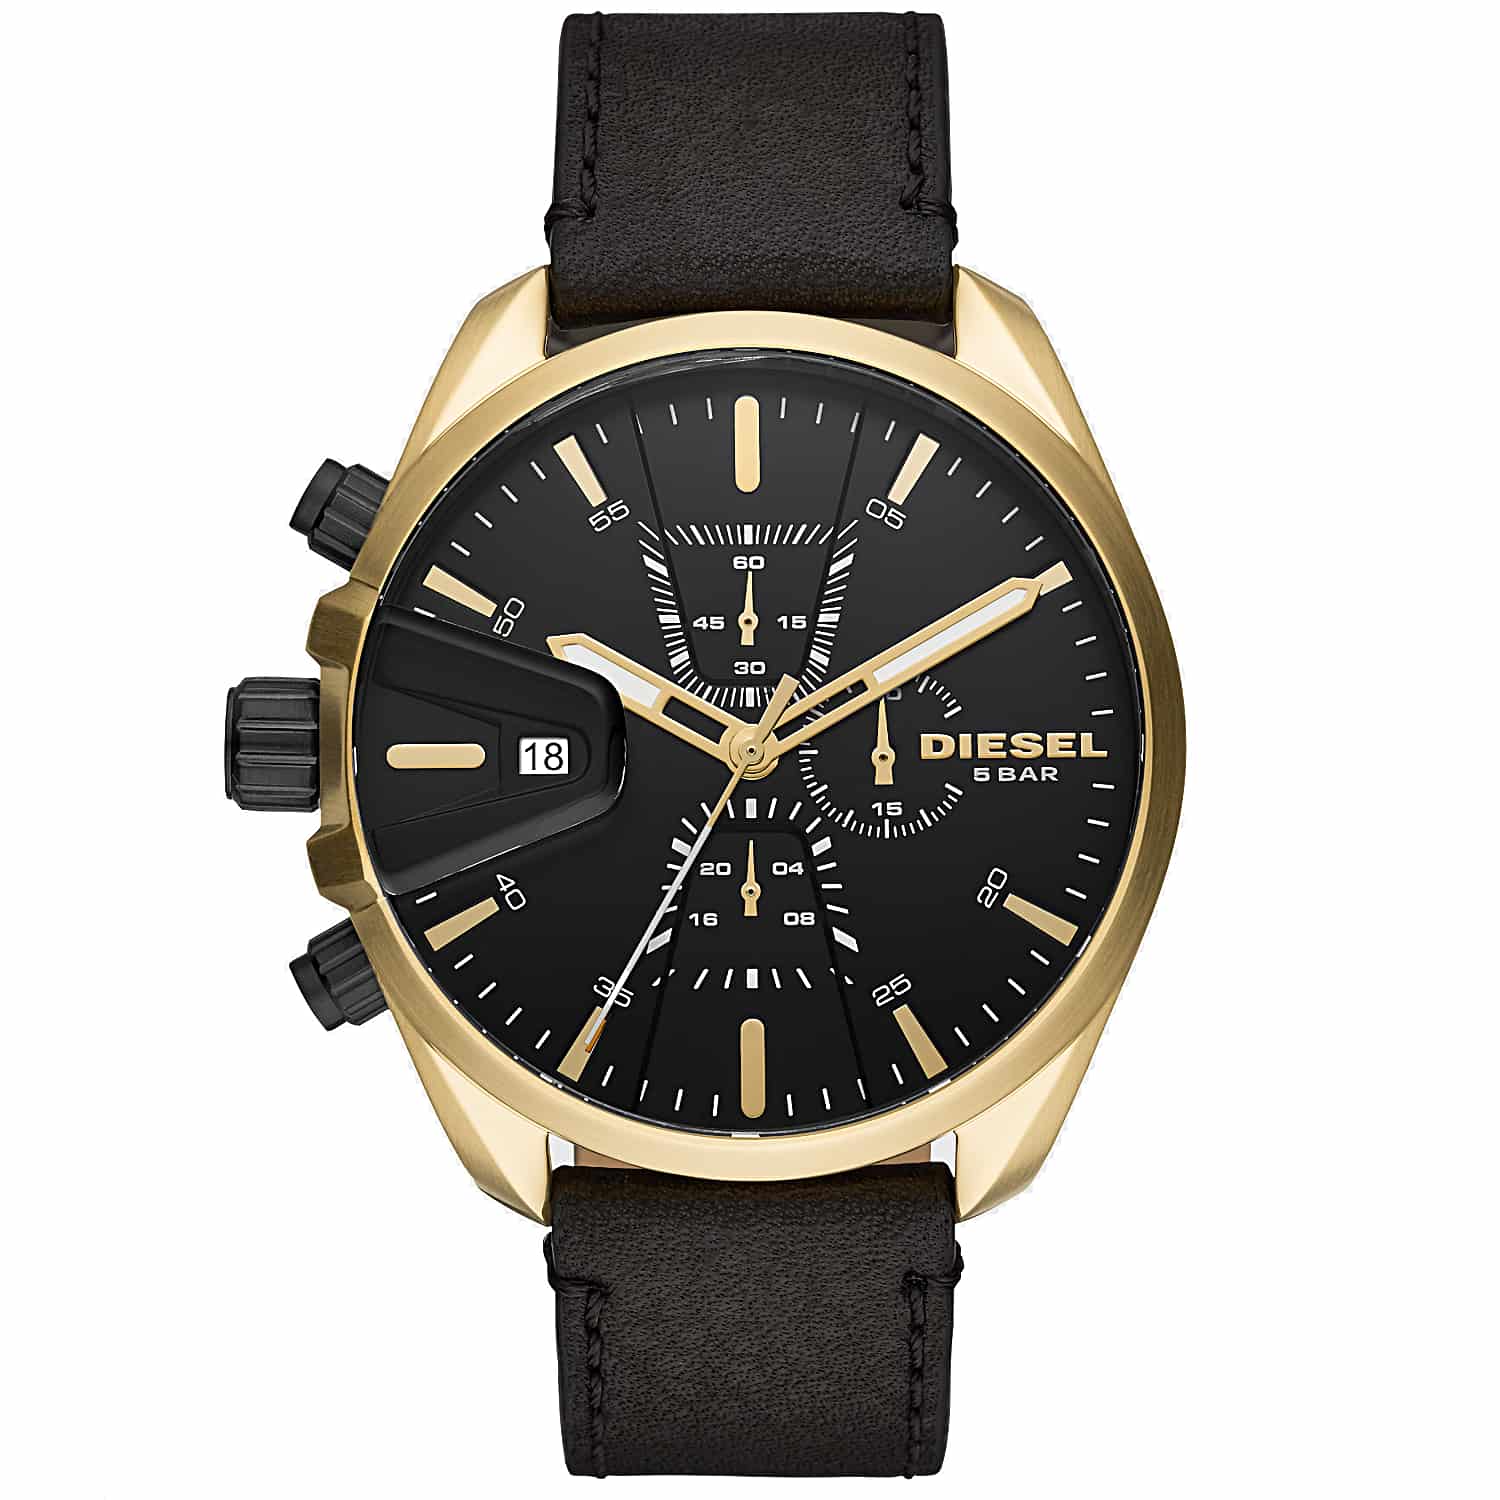 DZ4516 Diesel MS9 Chronograph Watch. This Diesel DZ4516  MS9 watch features a black sunray dial with gold-tone stick indexes, chronograph movement and black leather strap.    Humm -Buy Little things up to $1000 and choose 10 weekl @christies.online